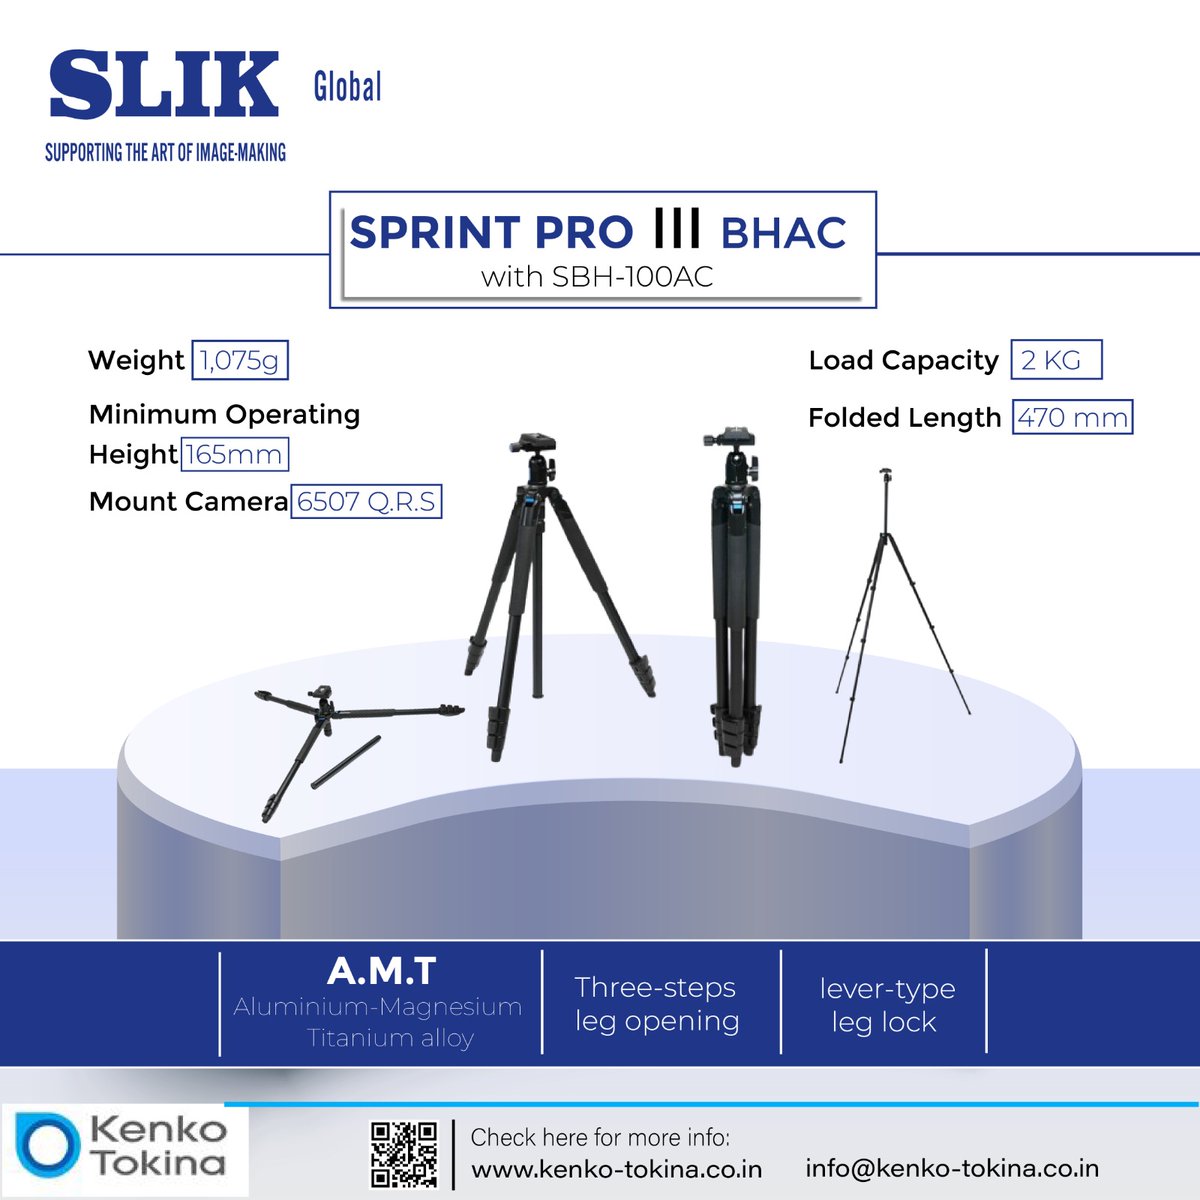 Big news for photography frick! The SPRINT PRO III tripod got even better and is now available in stock! 
.
✅ More Details Visit-kenko-tokina.co.in/product/sprint…
✅ Contact at 097695 00555 
.
#QuickRelease #SLIKTripod #RFMTechnology #LightweightTripod #PhotographyGear #CameraAccessories